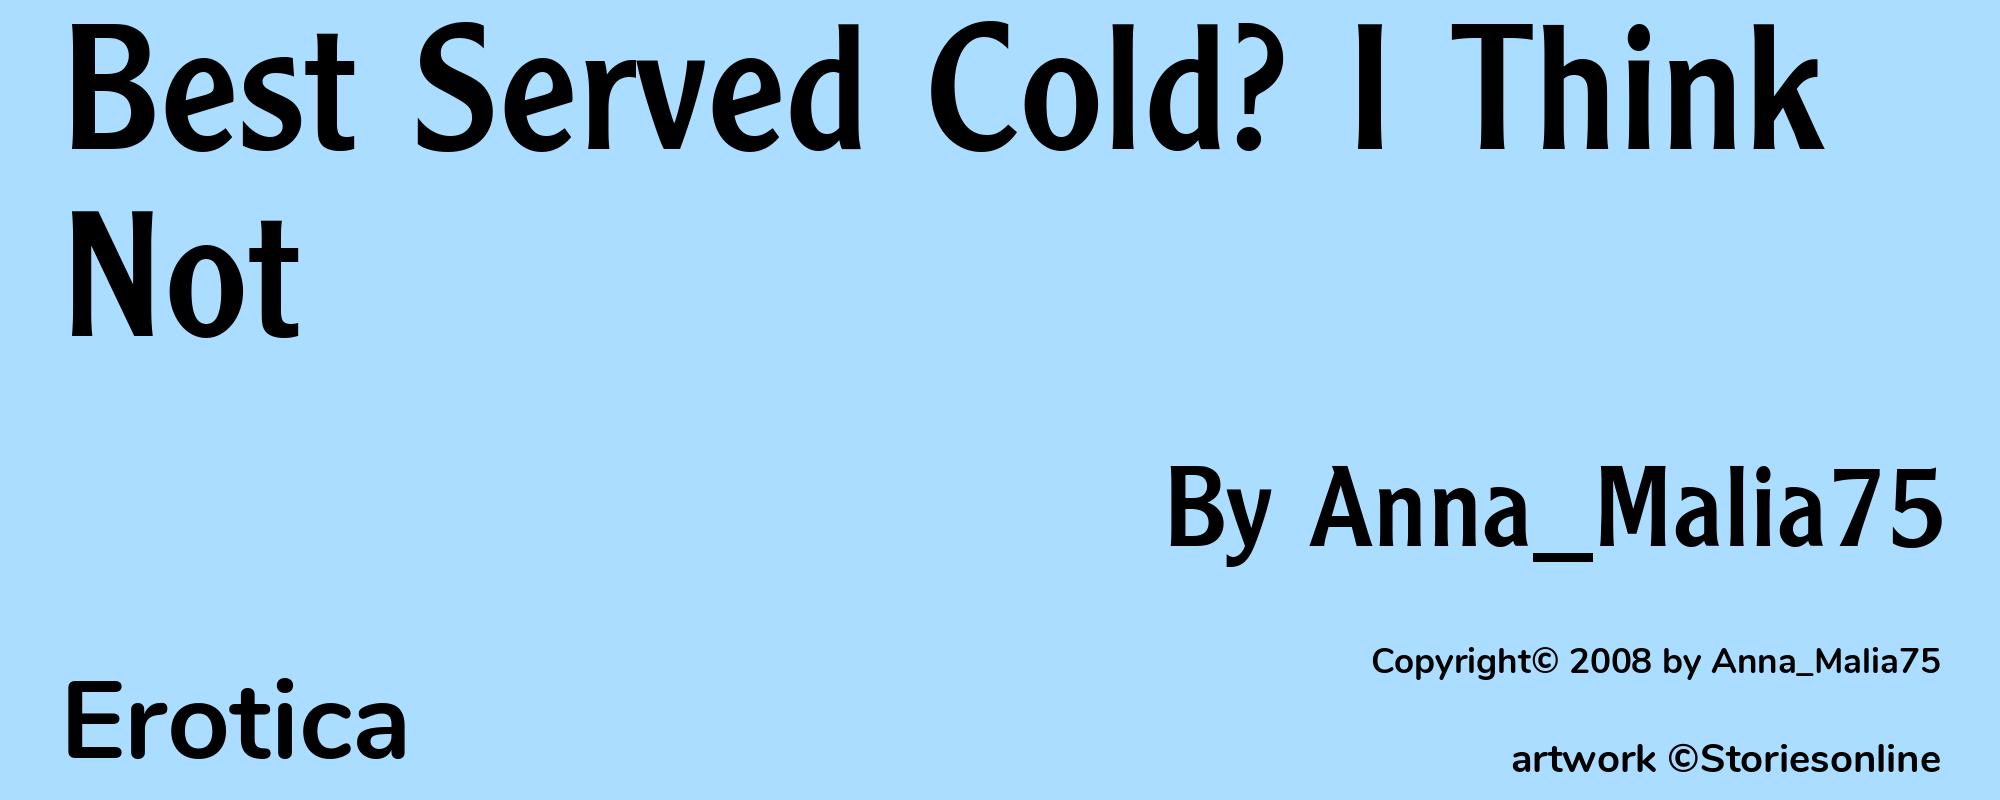 Best Served Cold? I Think Not - Cover